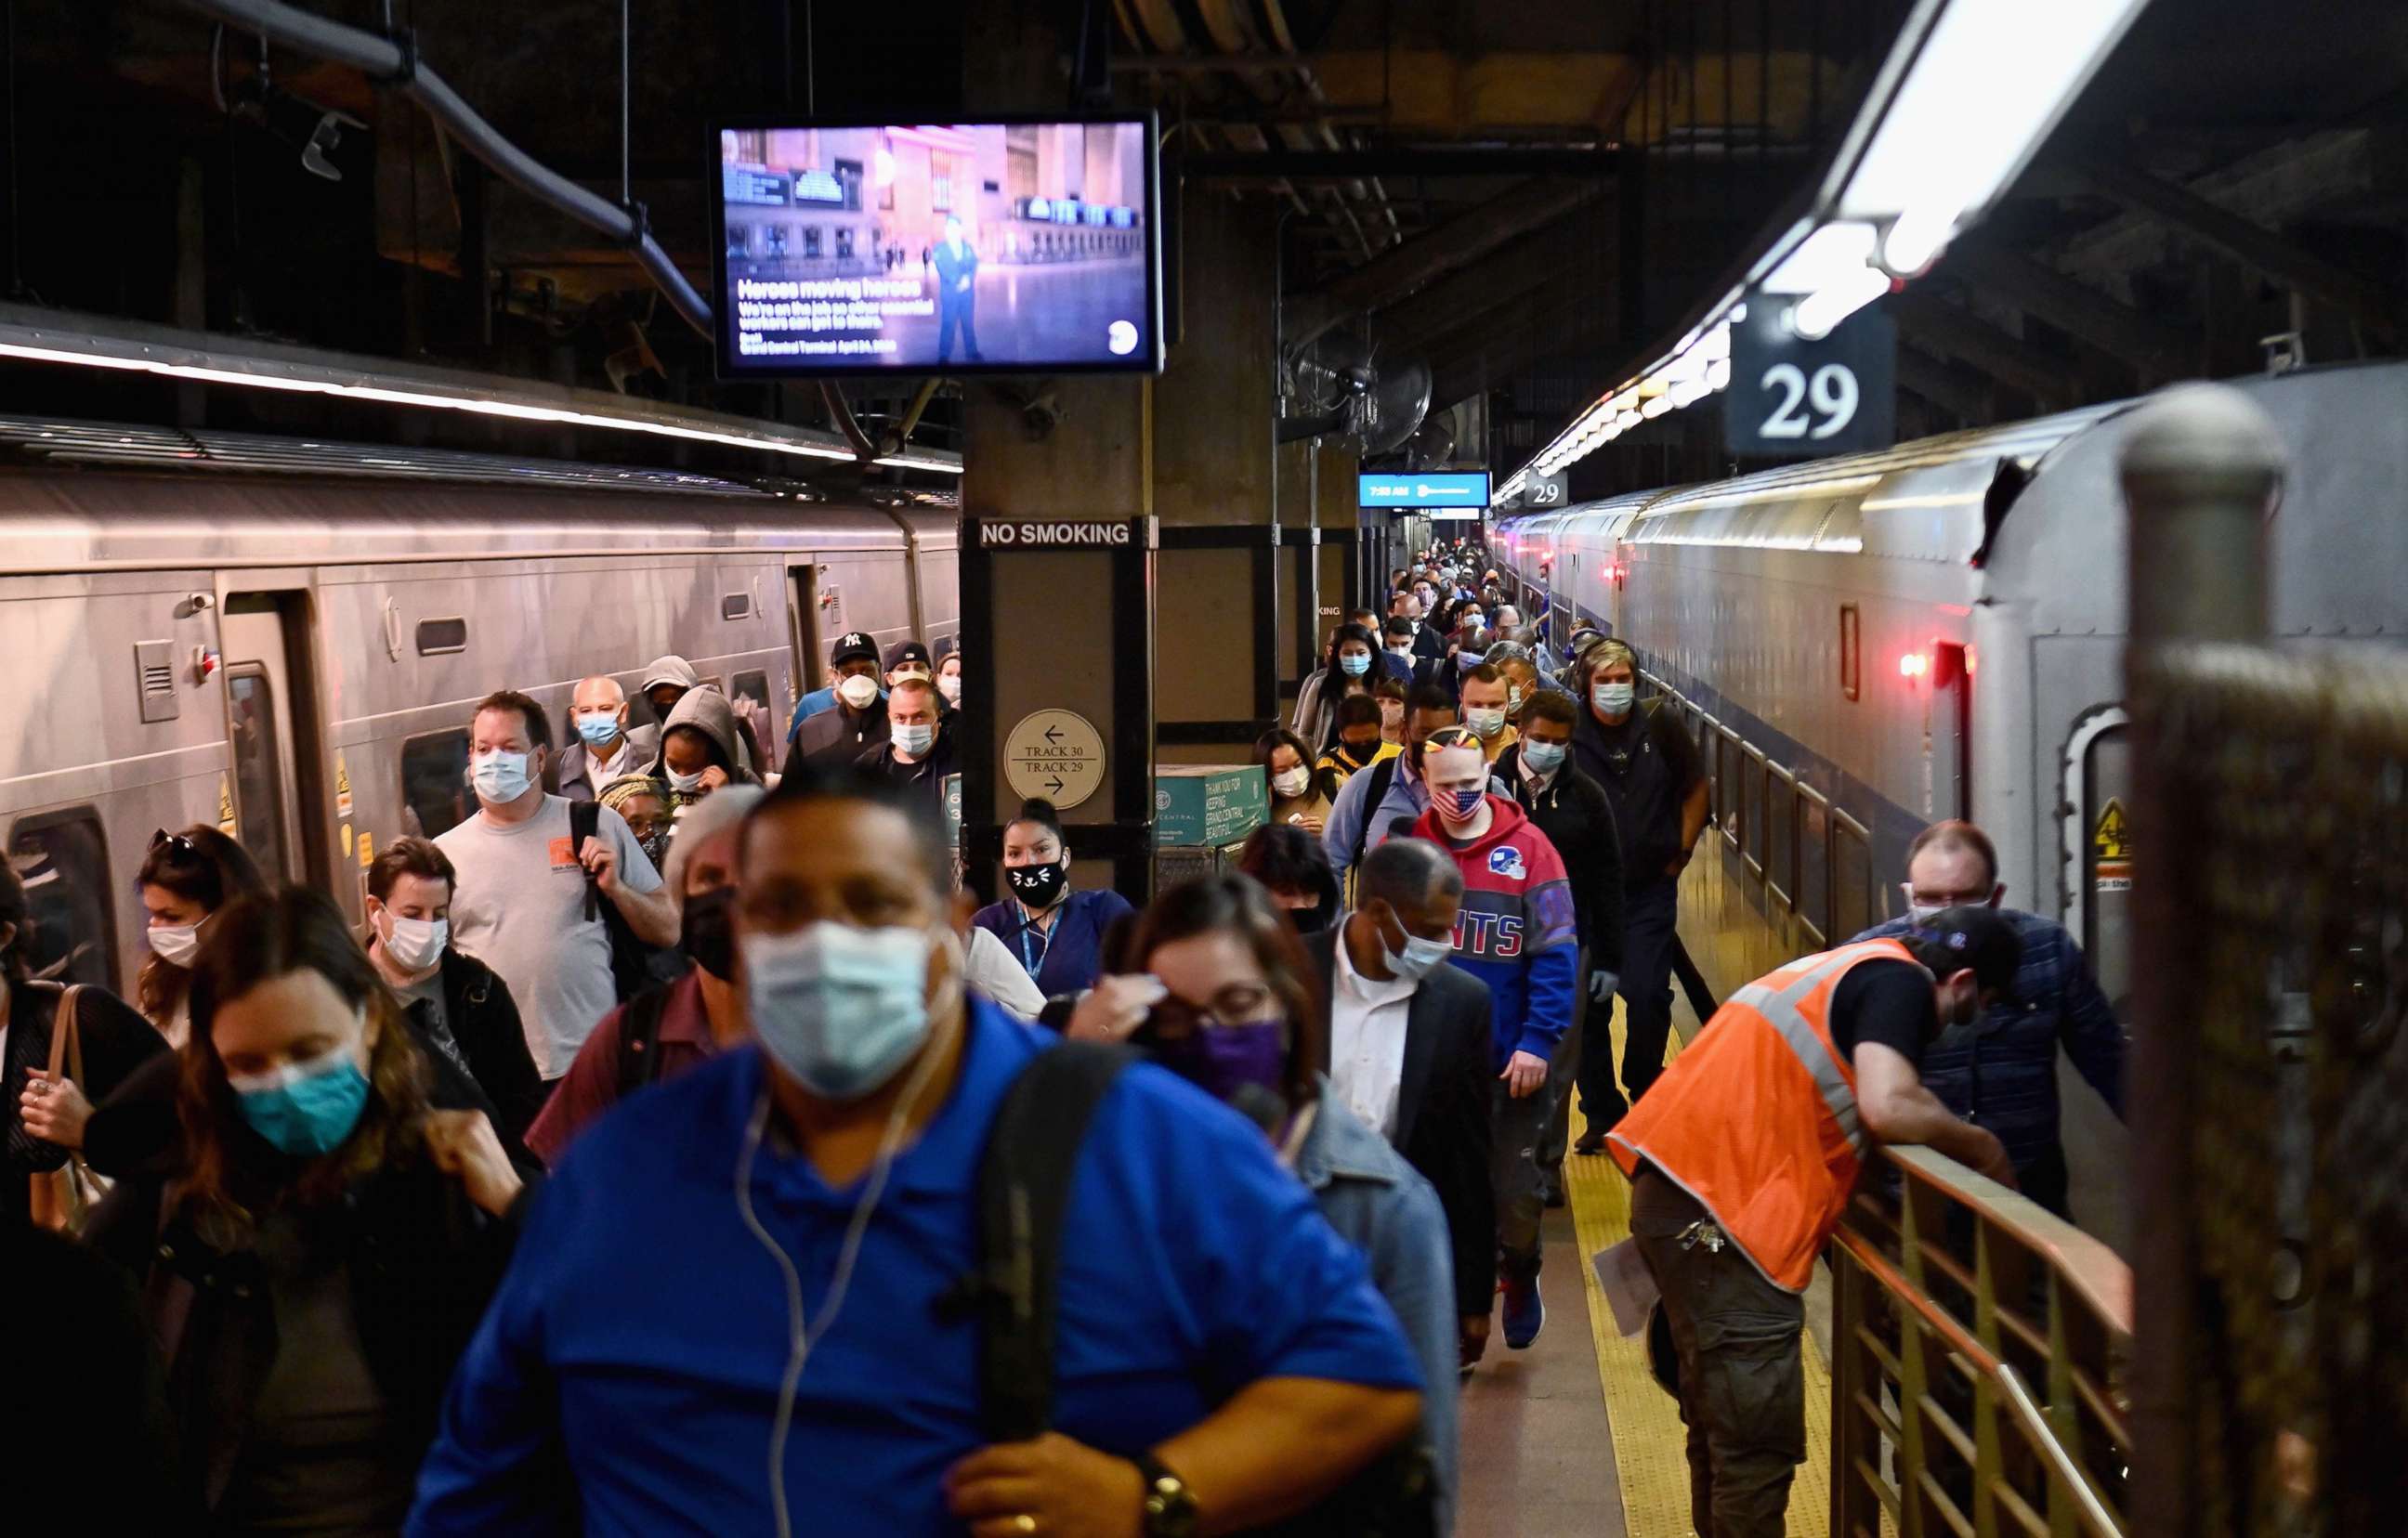 PHOTO: Commuters arrive at Grand Central Station on Metro-North trains during morning rush hour, June 8, 2020 in New York City, as the city enters "Phase 1" of a four-part reopening plan after spending more than two months under lockdown.